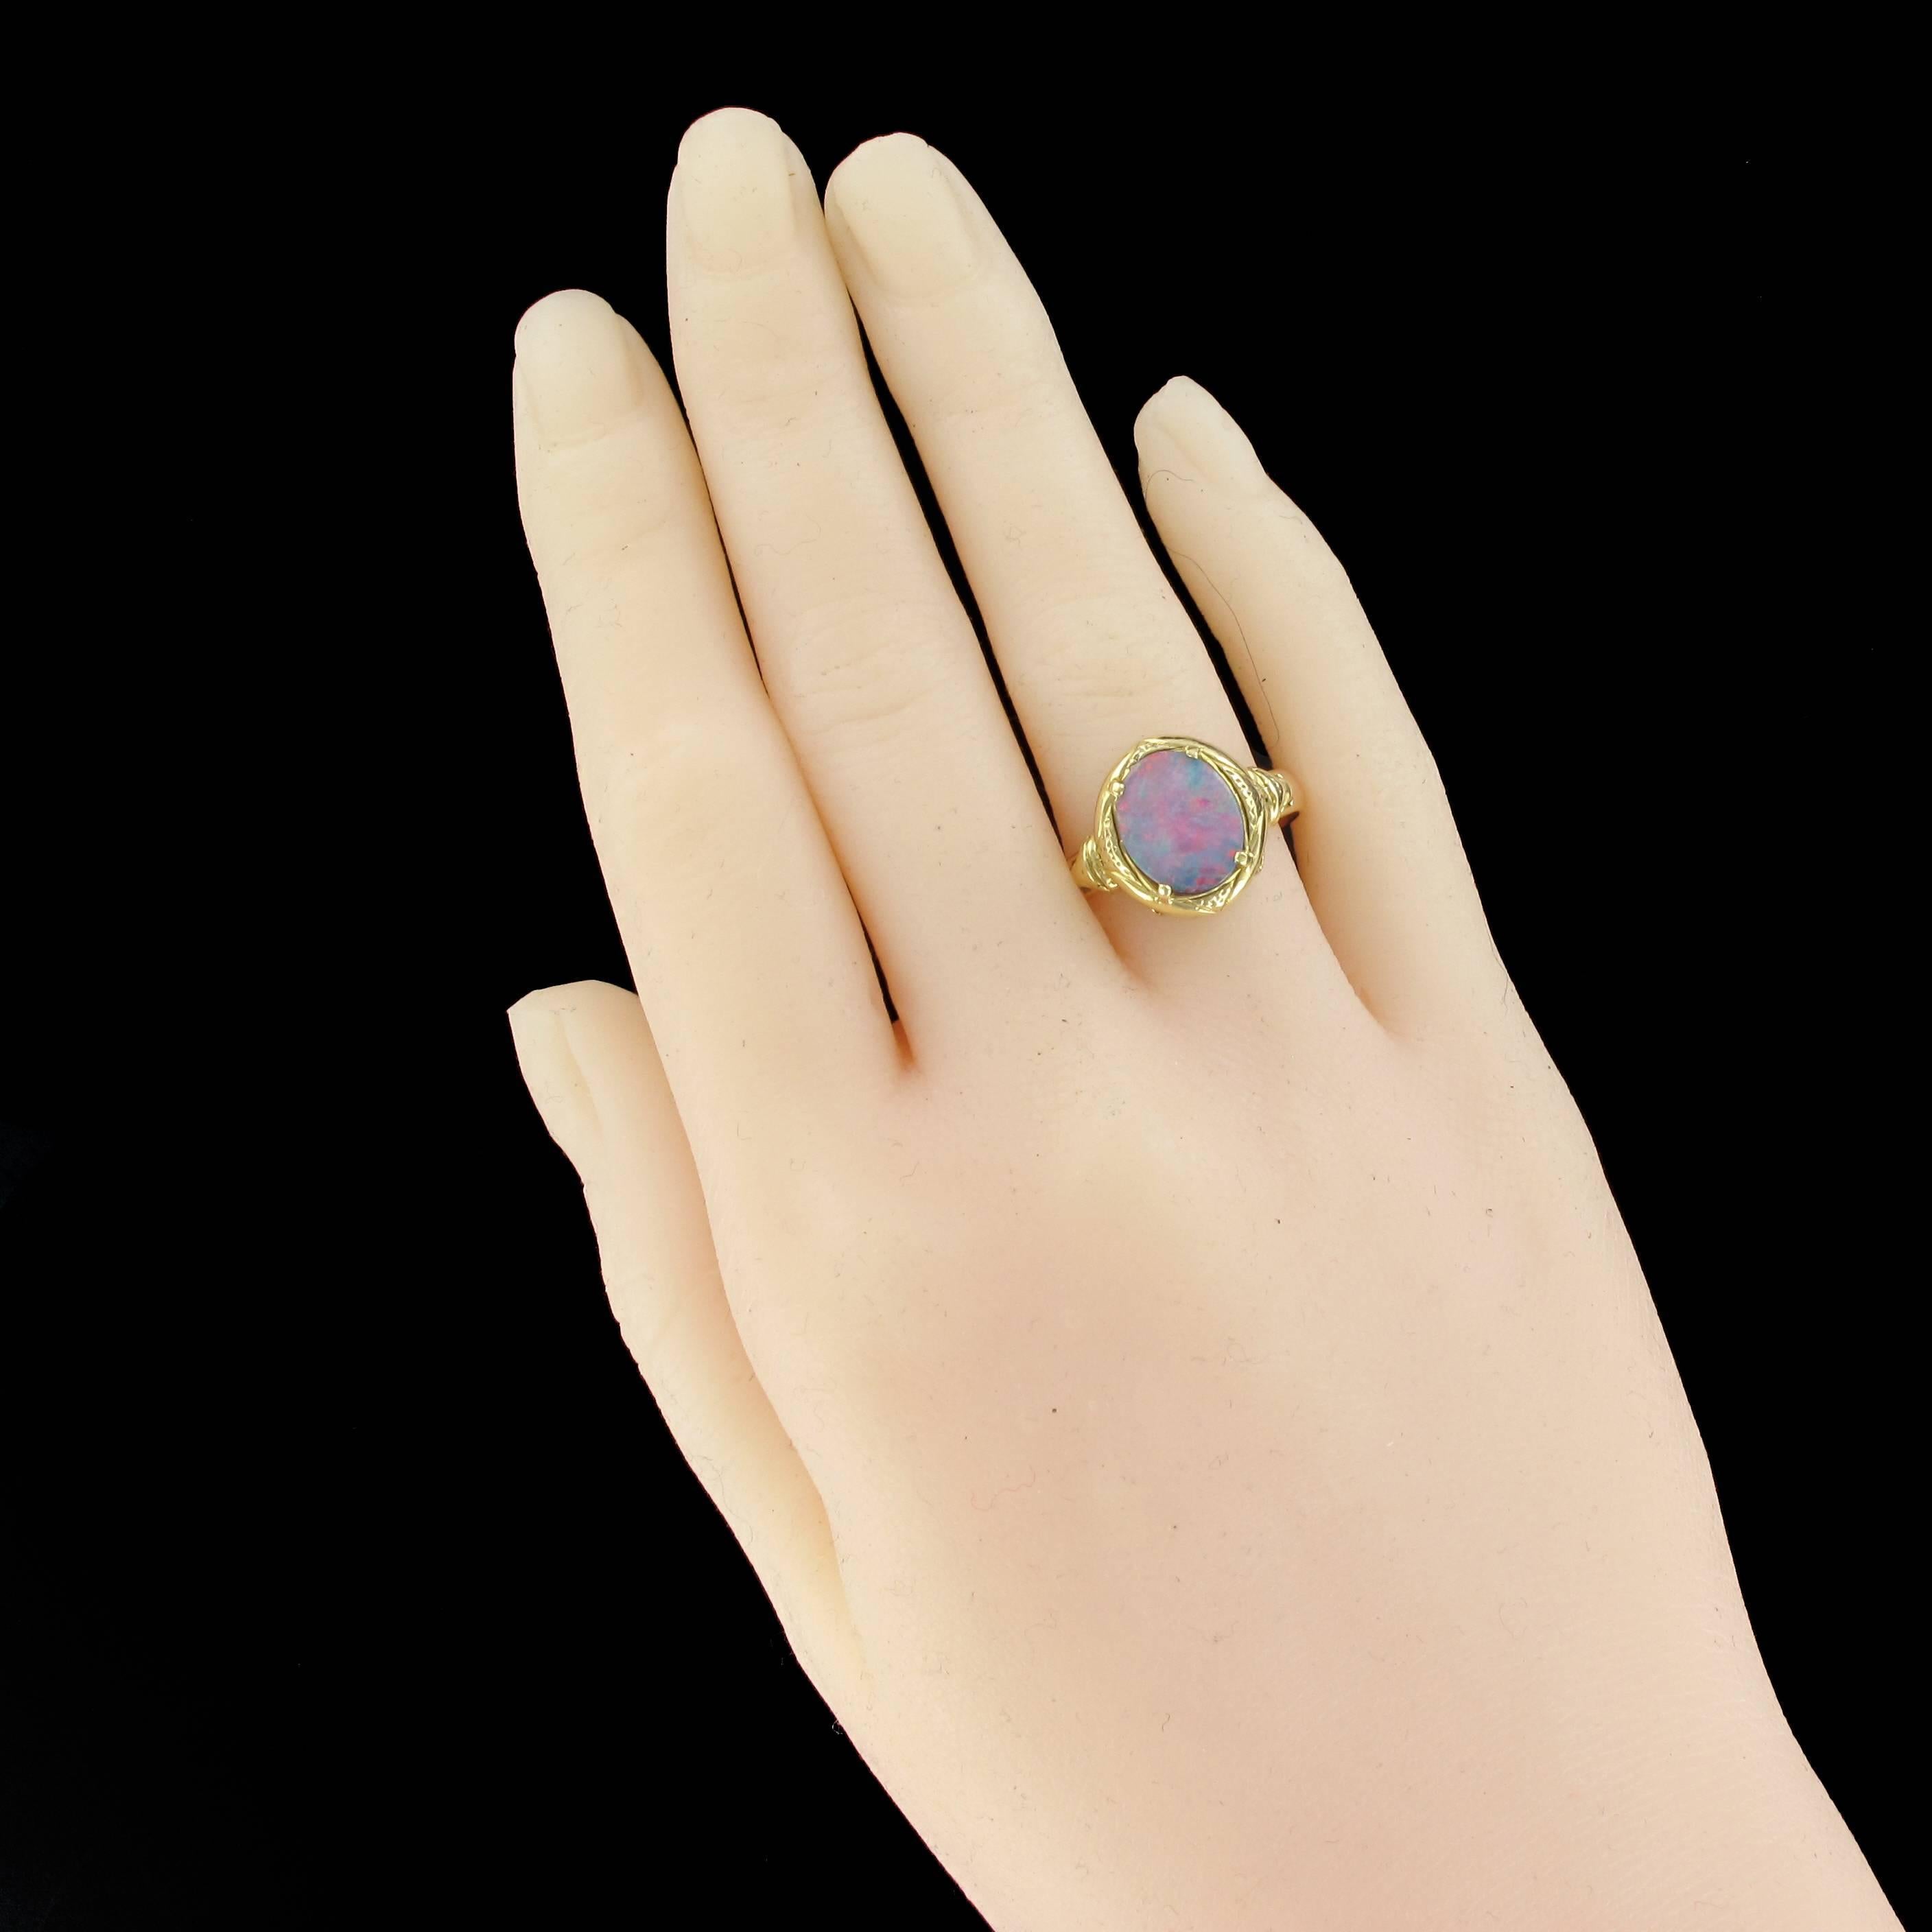 Art Nouveau 1900s Opal and 18 Carat Yellow Gold Ring